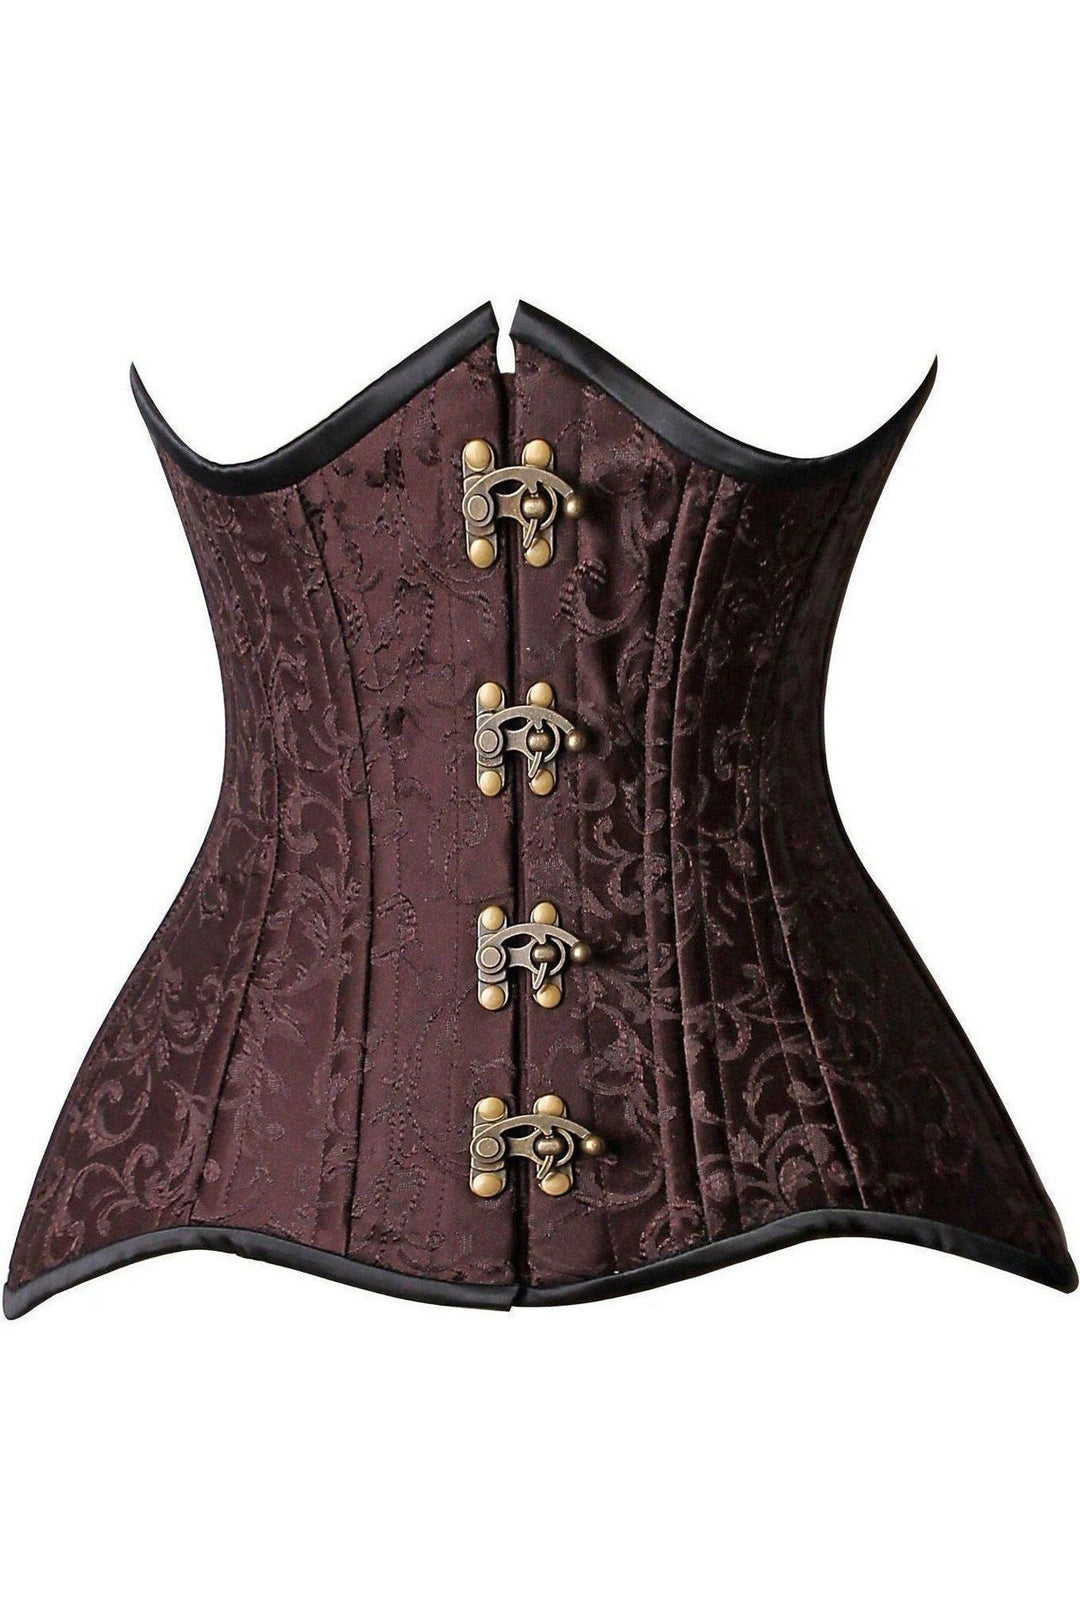 Top Drawer CURVY Brocade Double Steel Boned Under Bust Corset-Daisy Premium-SEXYSHOES.COM